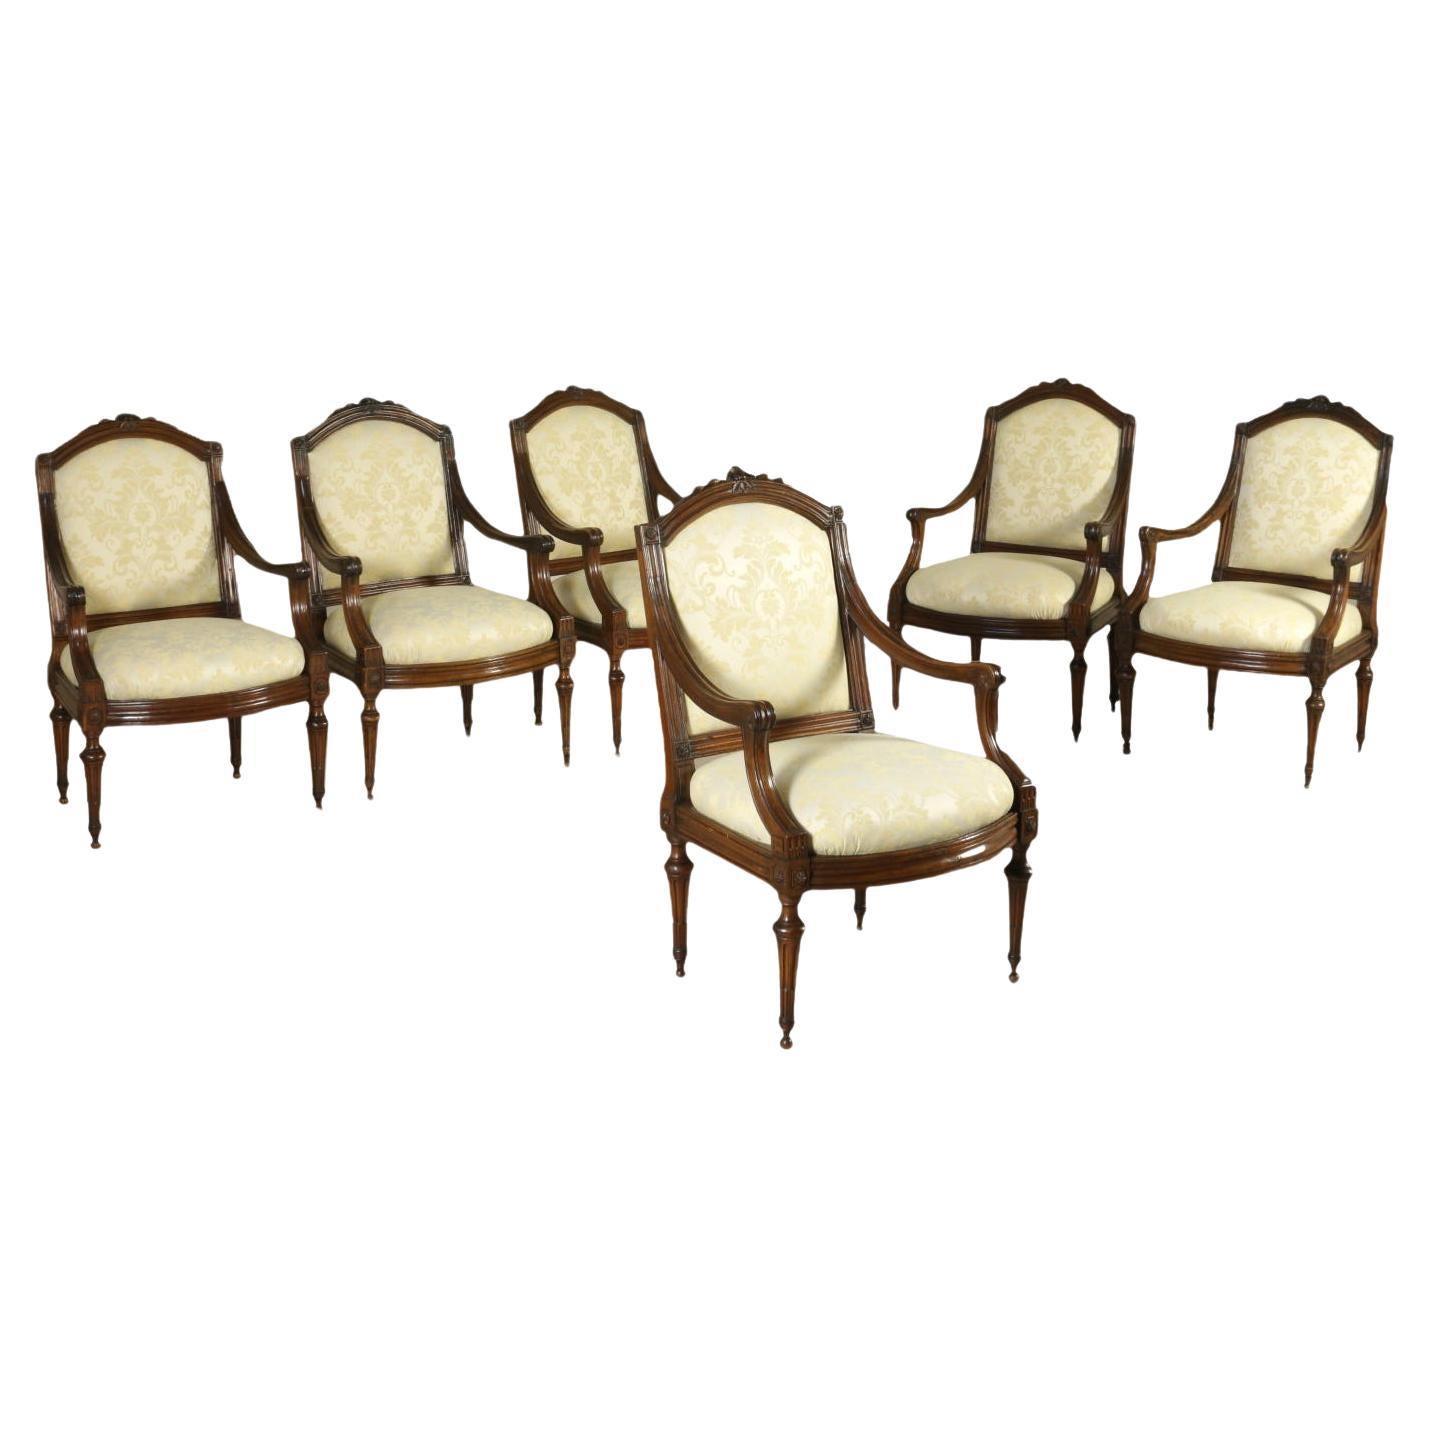 Group of Six Louis XVI Armchairs, in walnut, white and brown For Sale